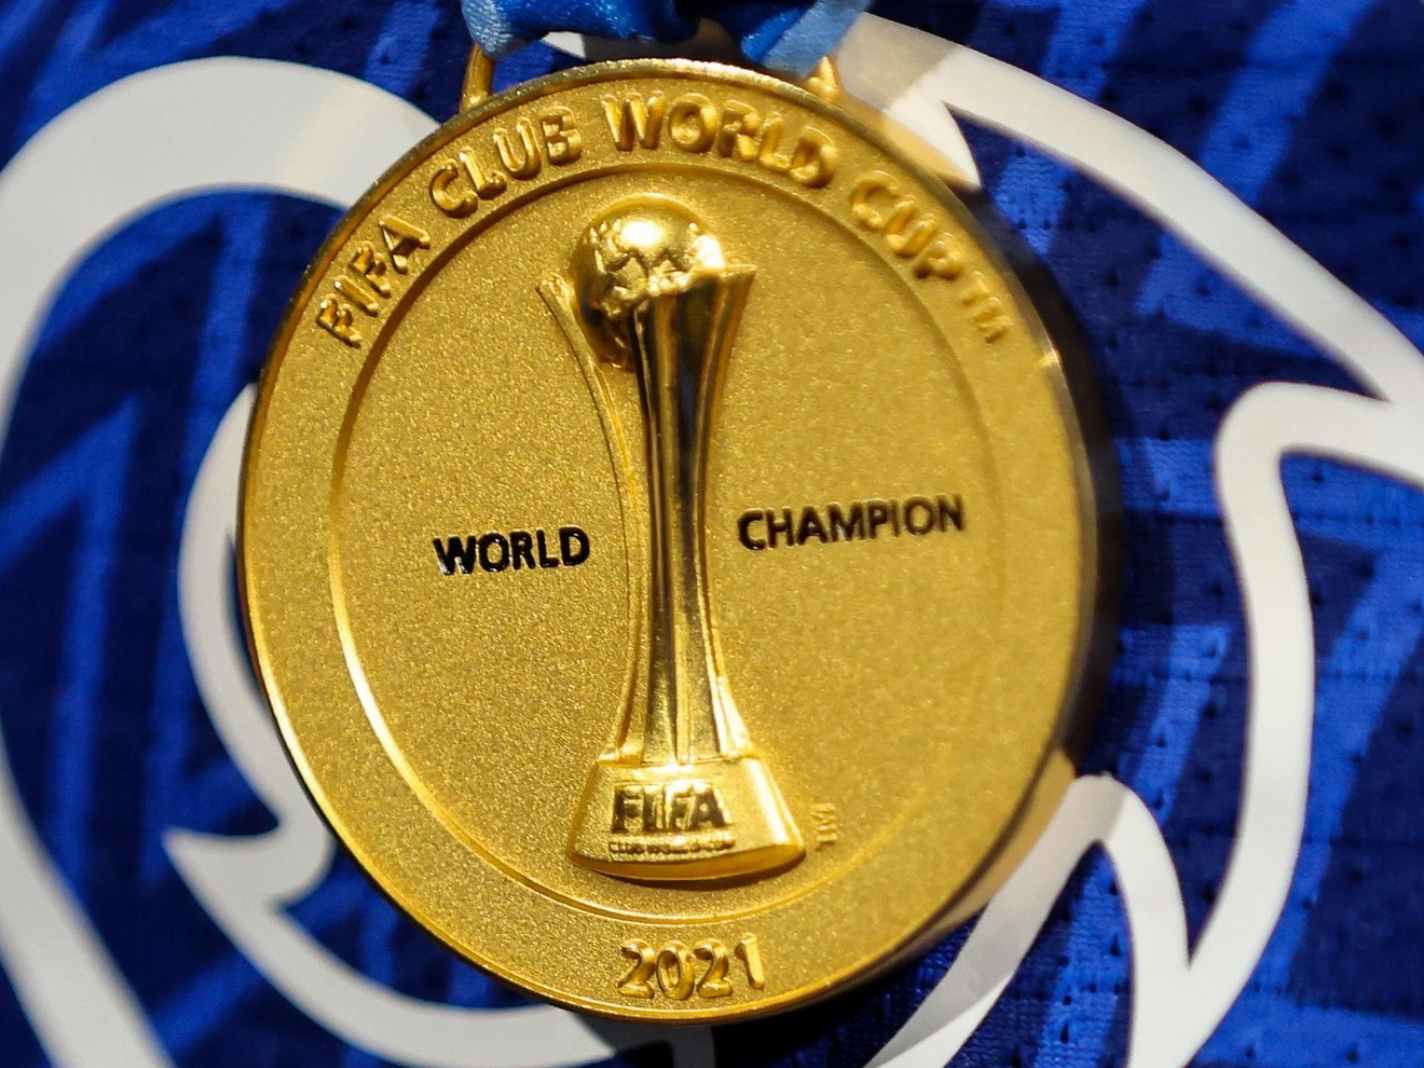 Club World Cup medal for Chelsea players